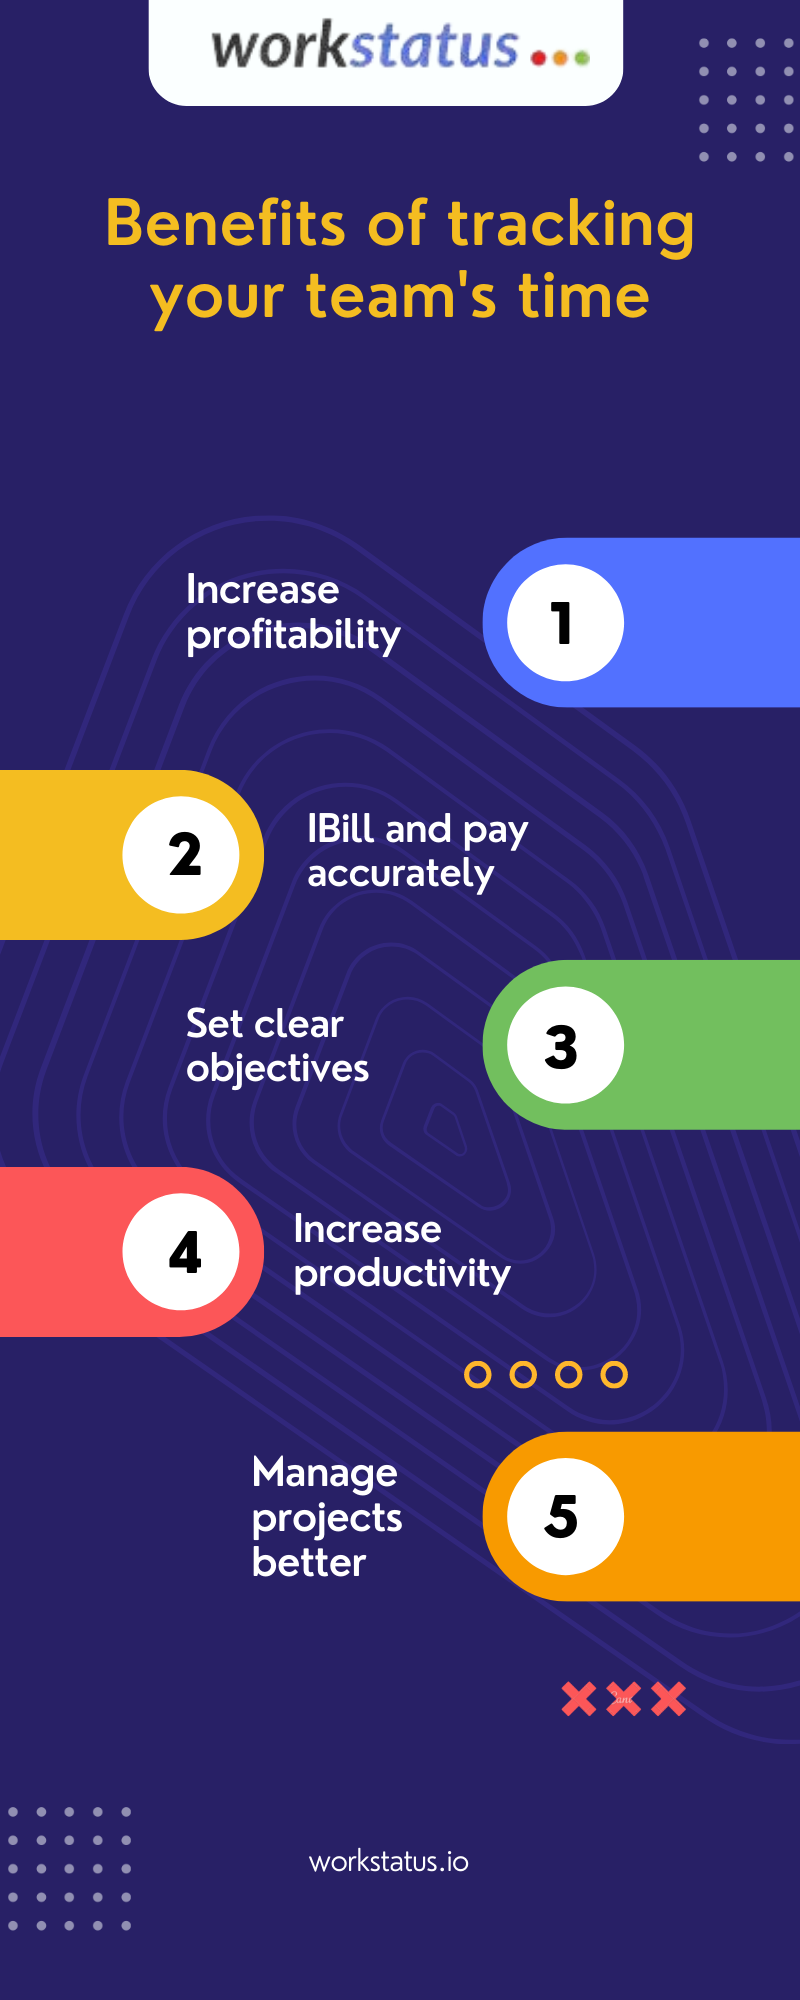 Benefits of tracking
your team's time

Increase
profitability

  

IBill and pay
accurately

 

Set clear
objectives

  

Increase
productivity

 

0000

Manage
projects
[oT34 (Tg

  

LR

[
cee workstatus.io
[a
[